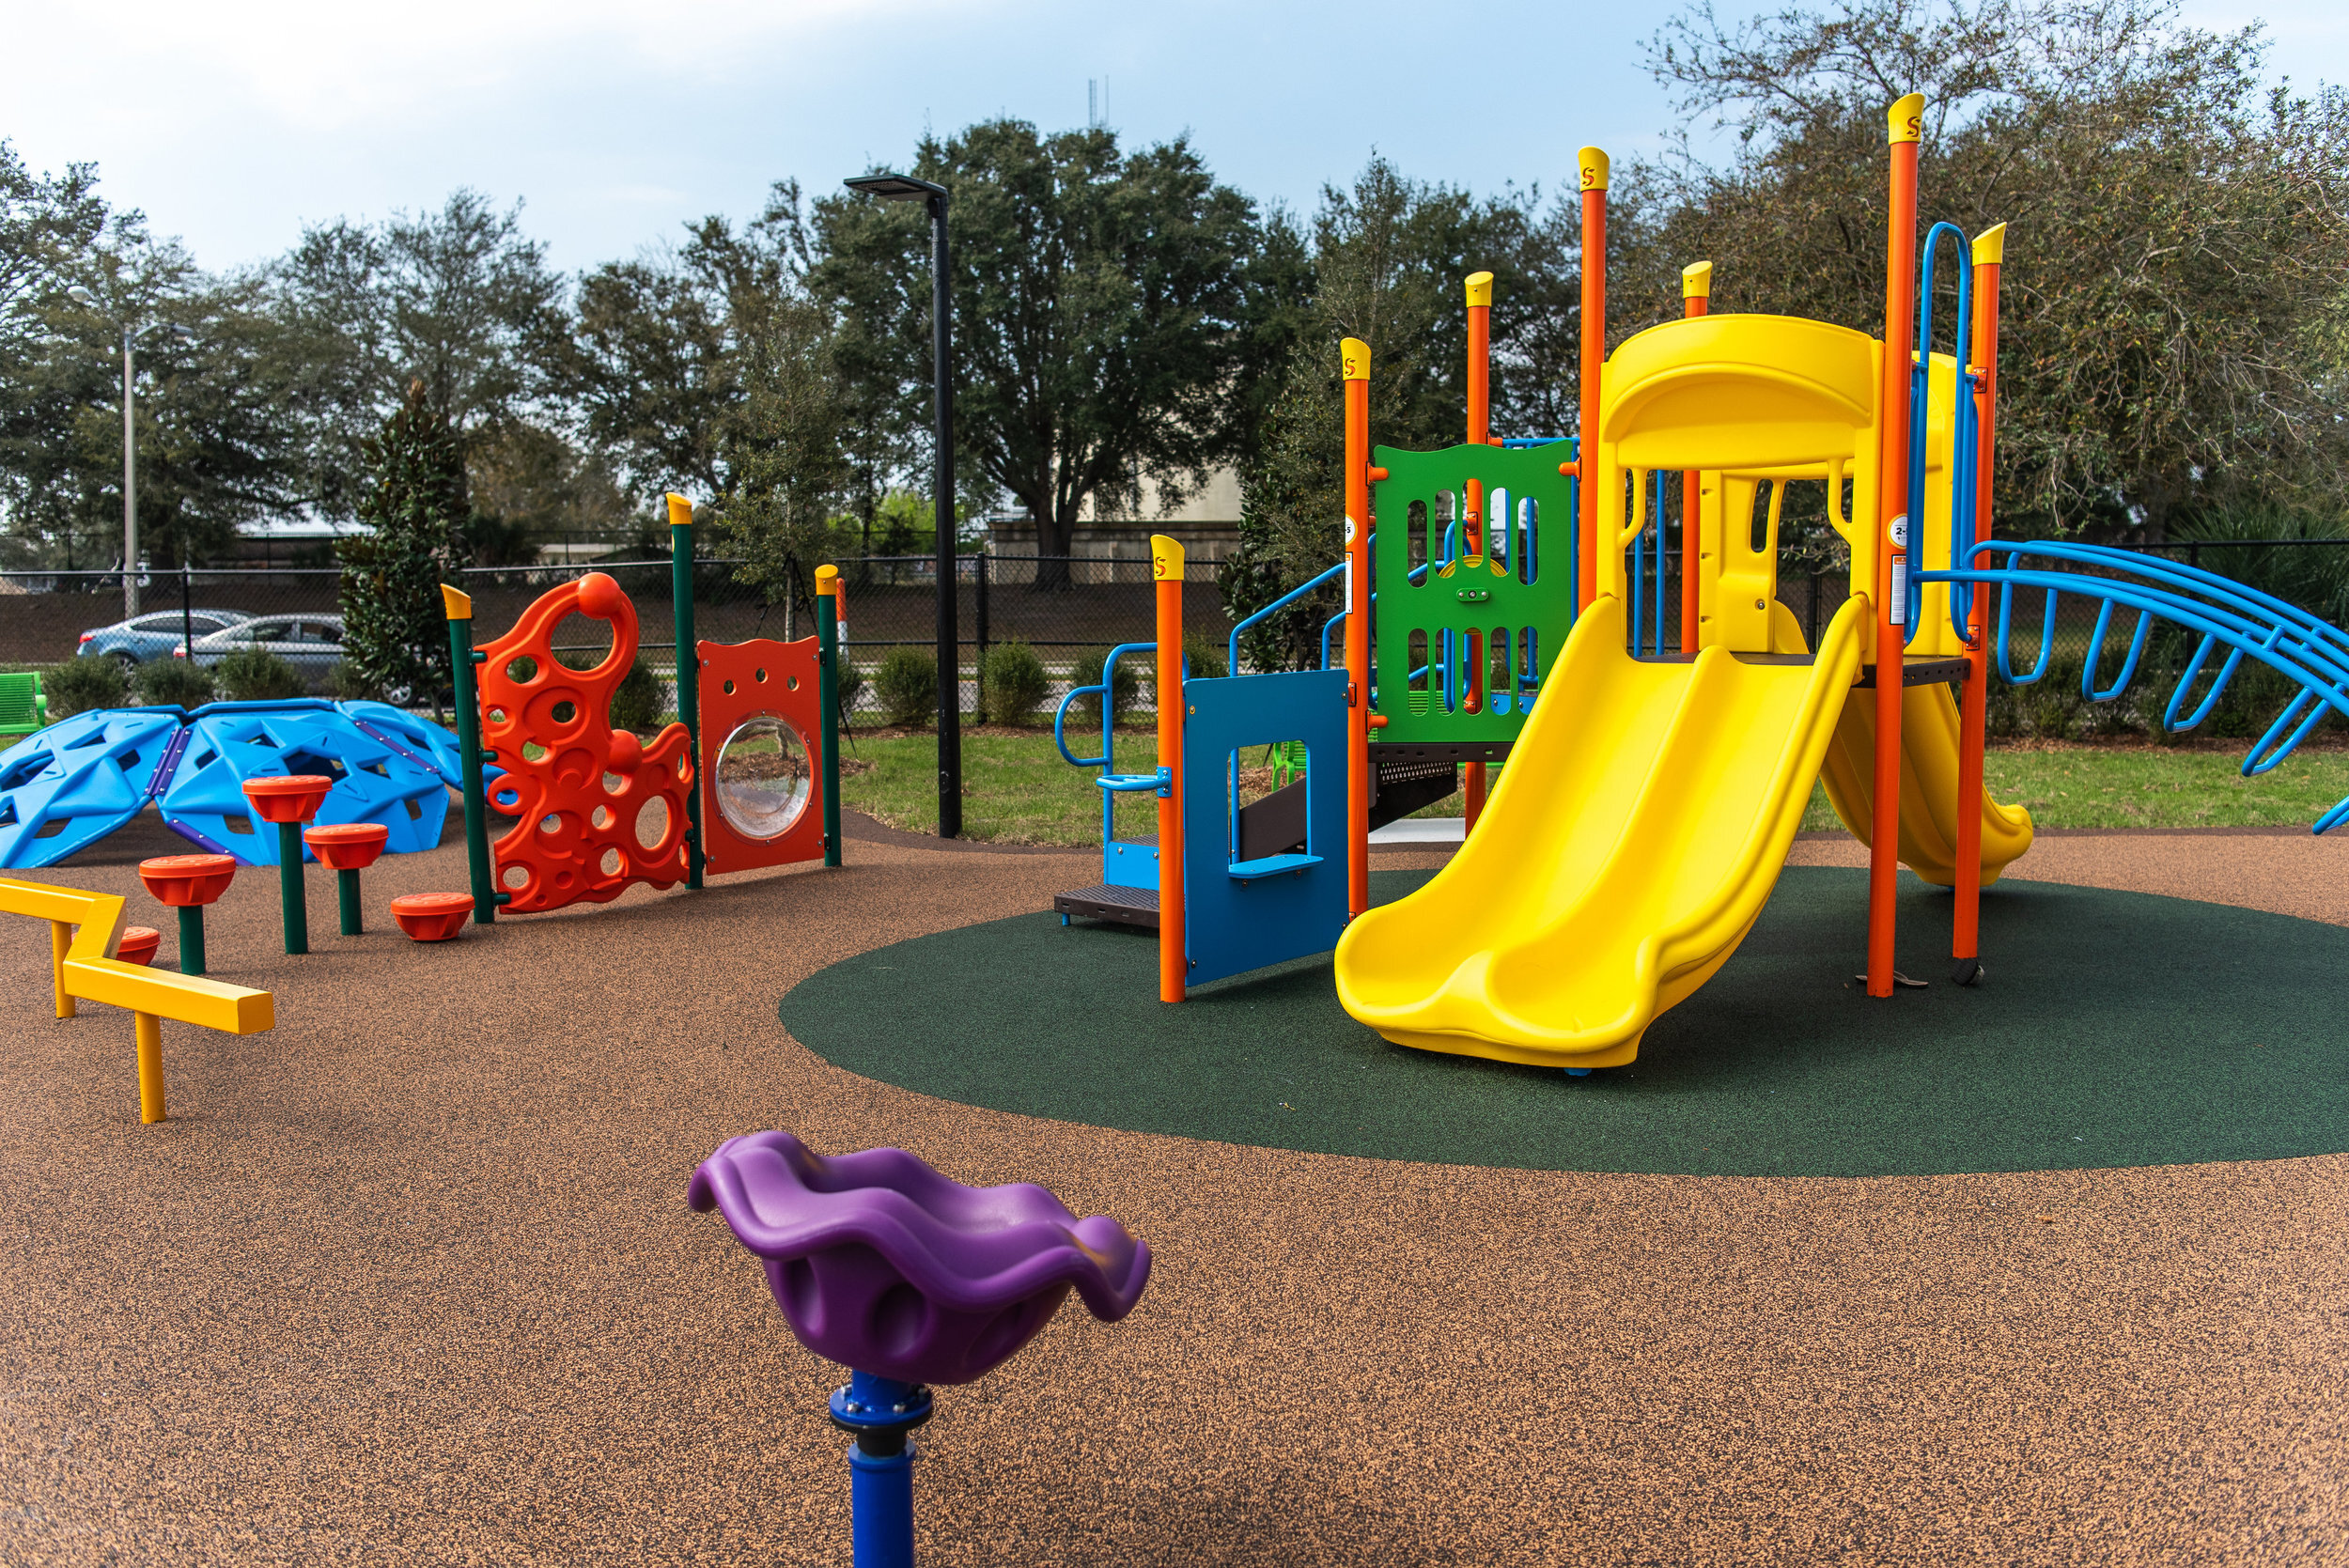 SENSES Park Provides Much-Needed Inclusive Playground For Children